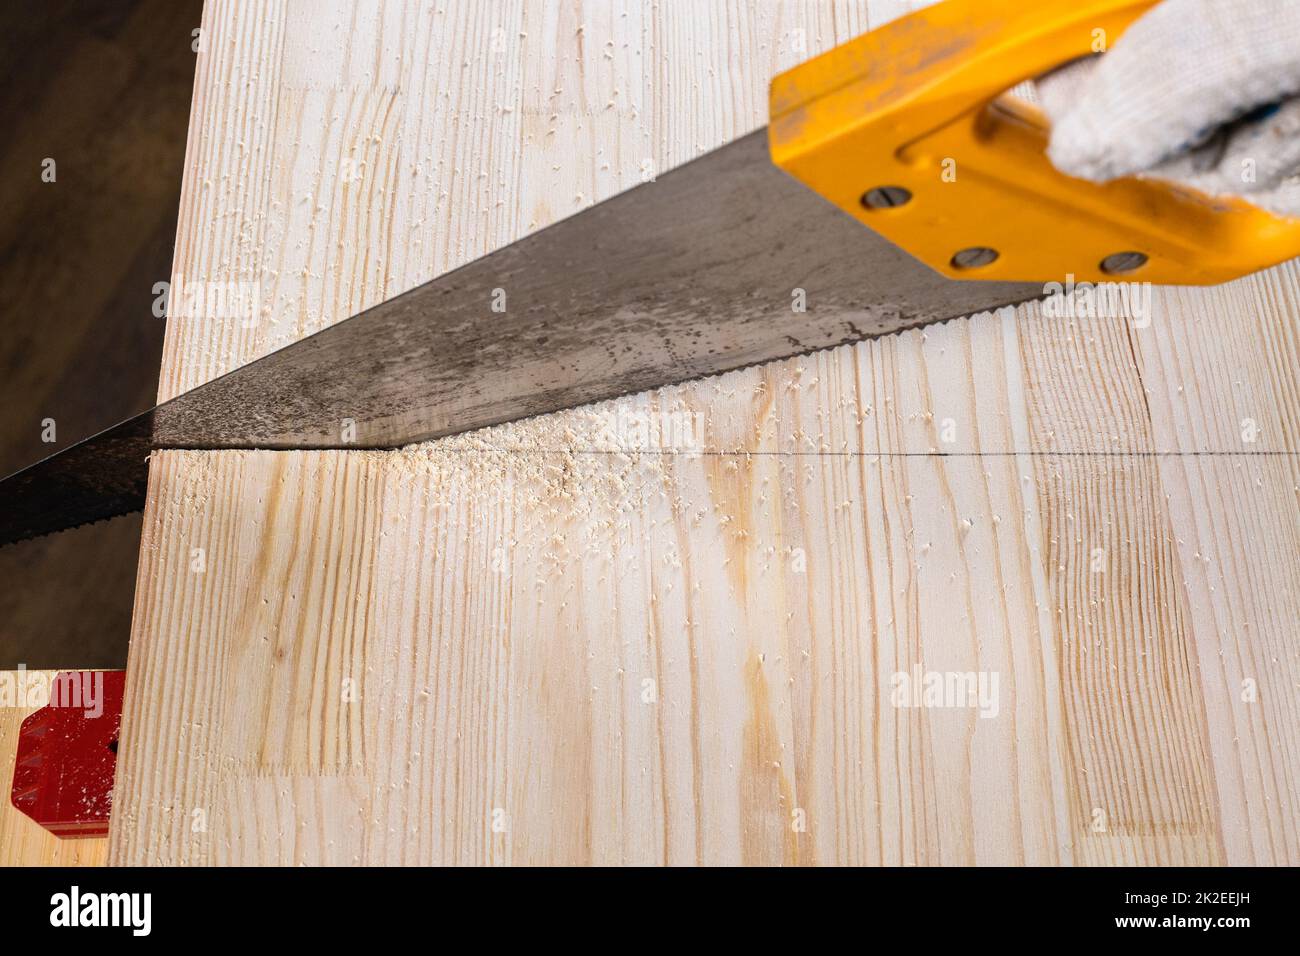 pov view of sawing wooden board with hand saw Stock Photo